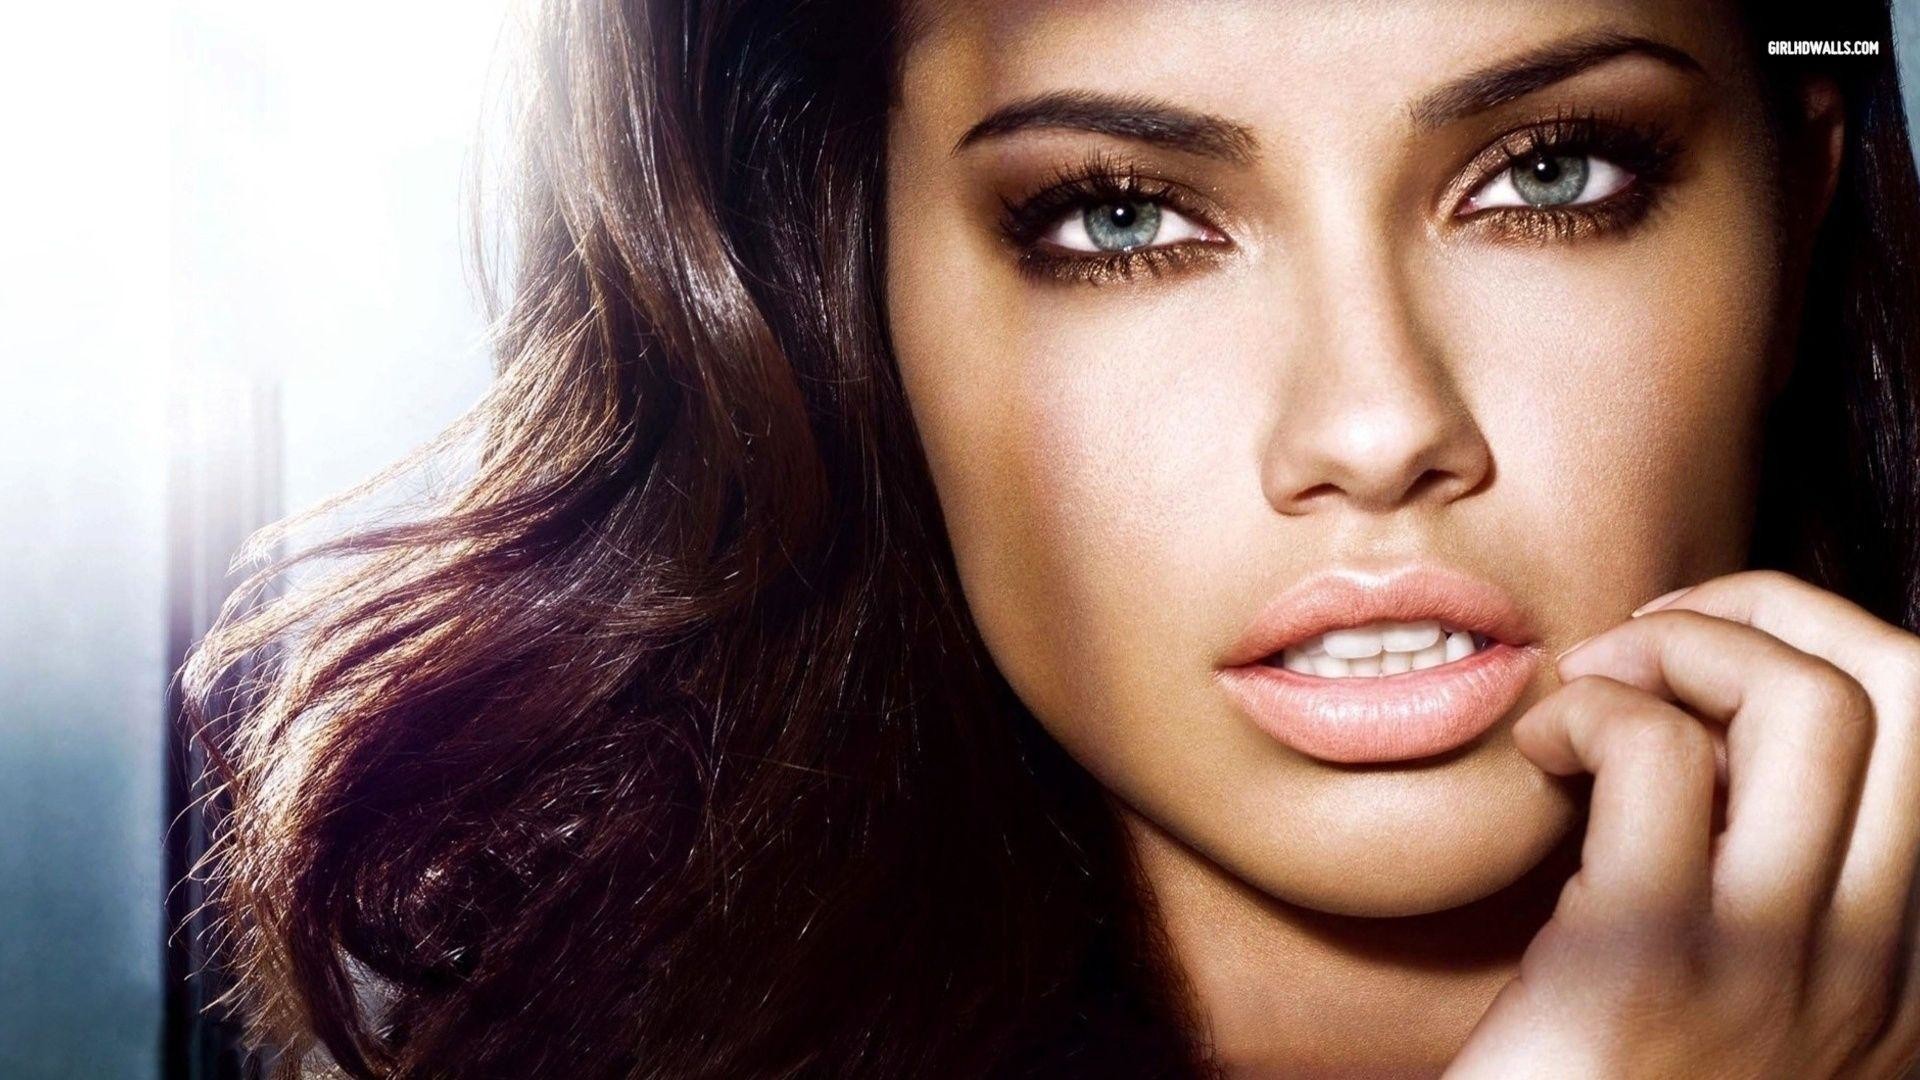 1920x1080 Adriana Lima Wallpapers | Piccry.com: Picture Idea Gallery